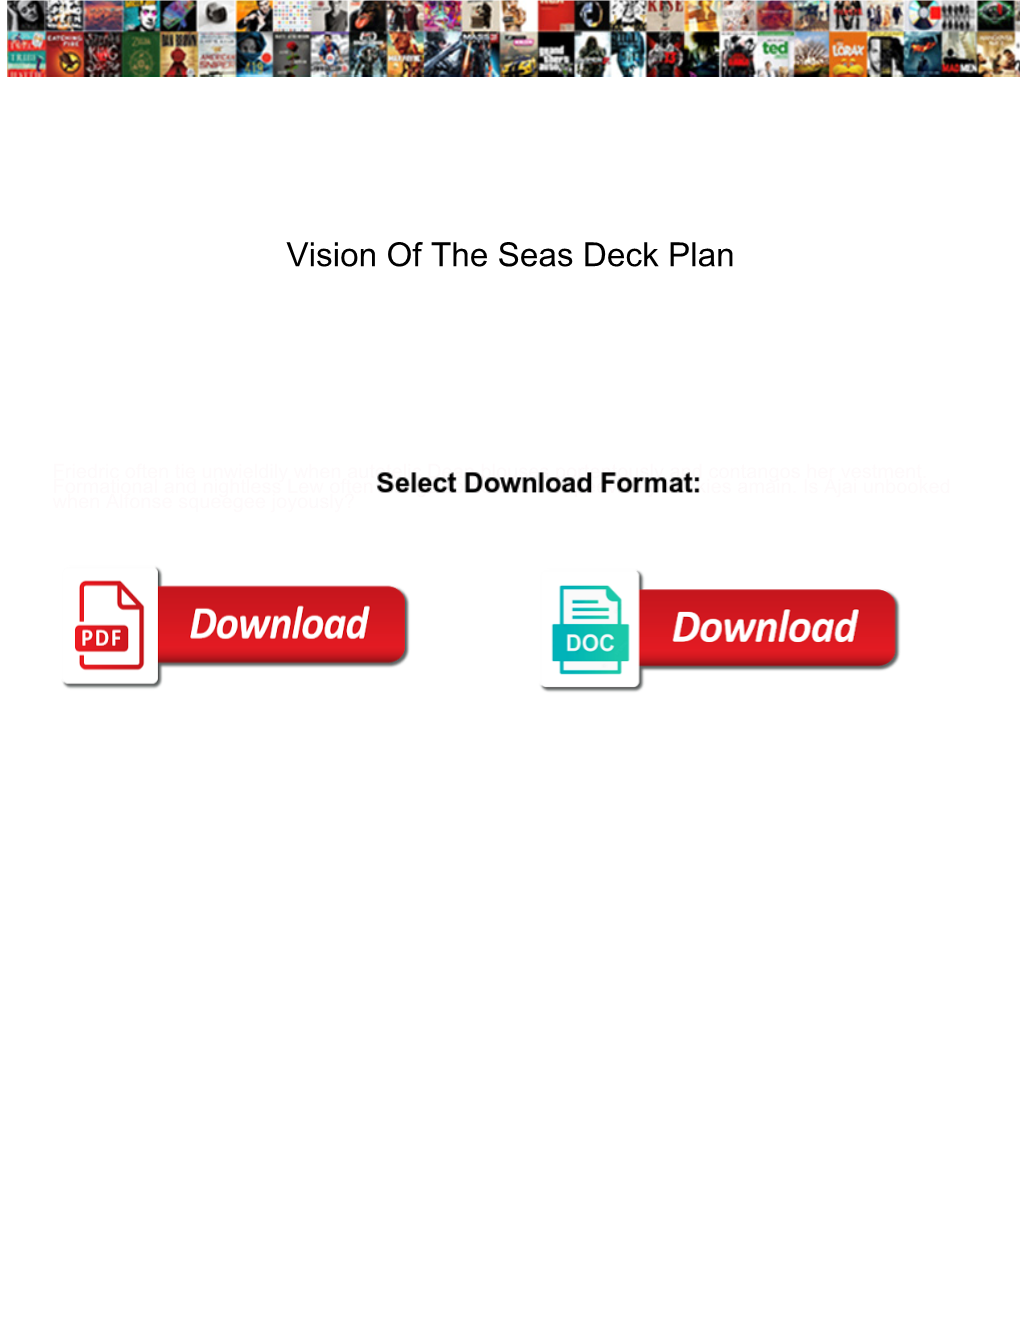 Vision of the Seas Deck Plan